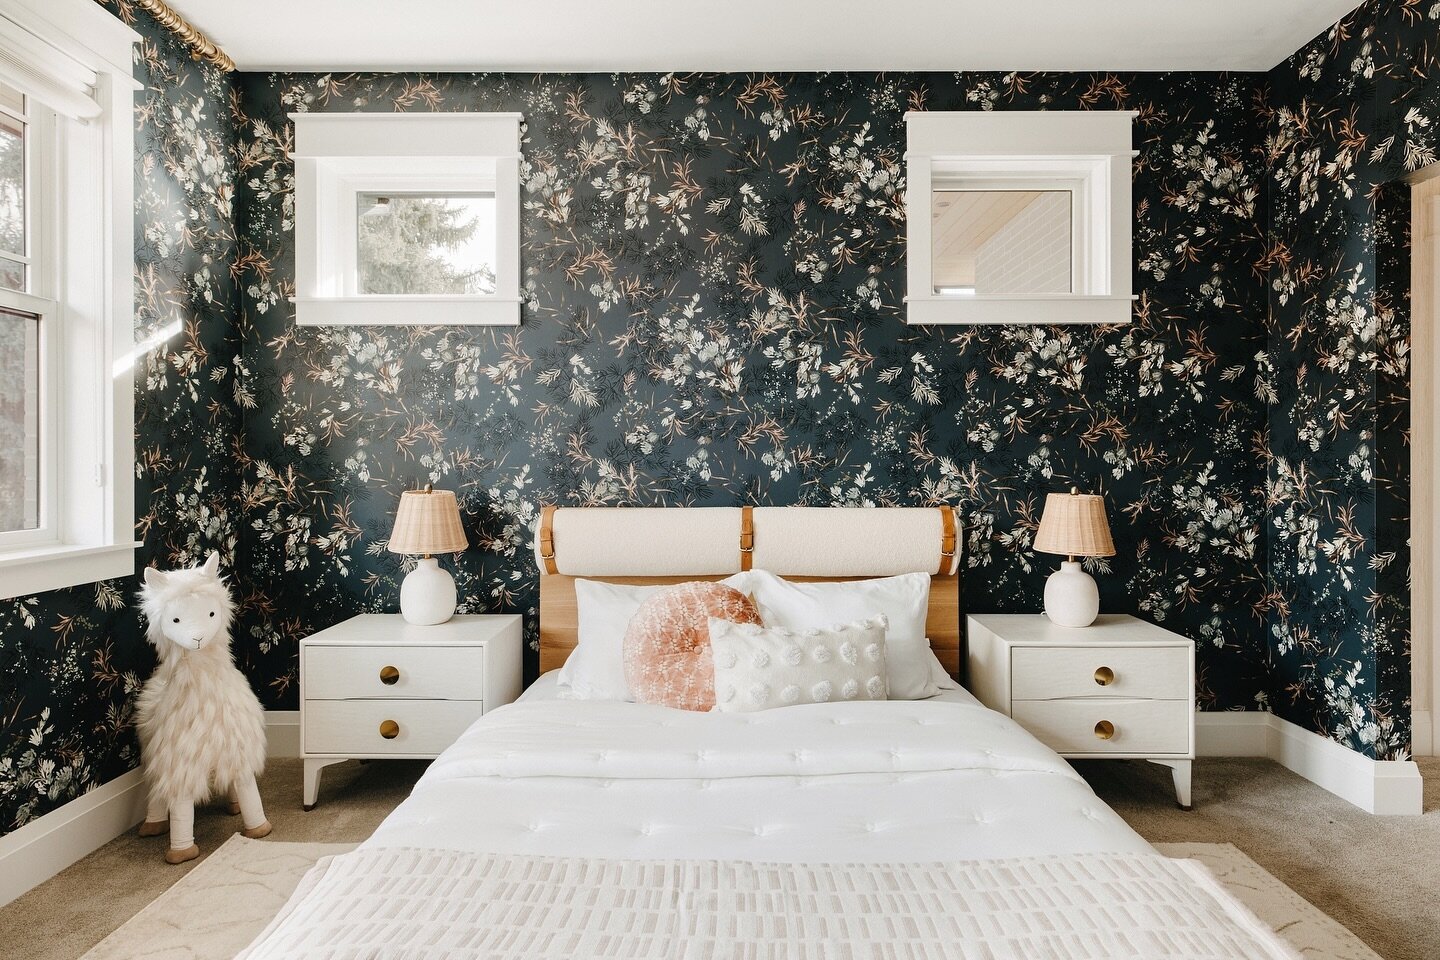 Dreamiest wallpaper in the cutest kid bedroom. We love a dark floral 🥀
Styled by @den.styling